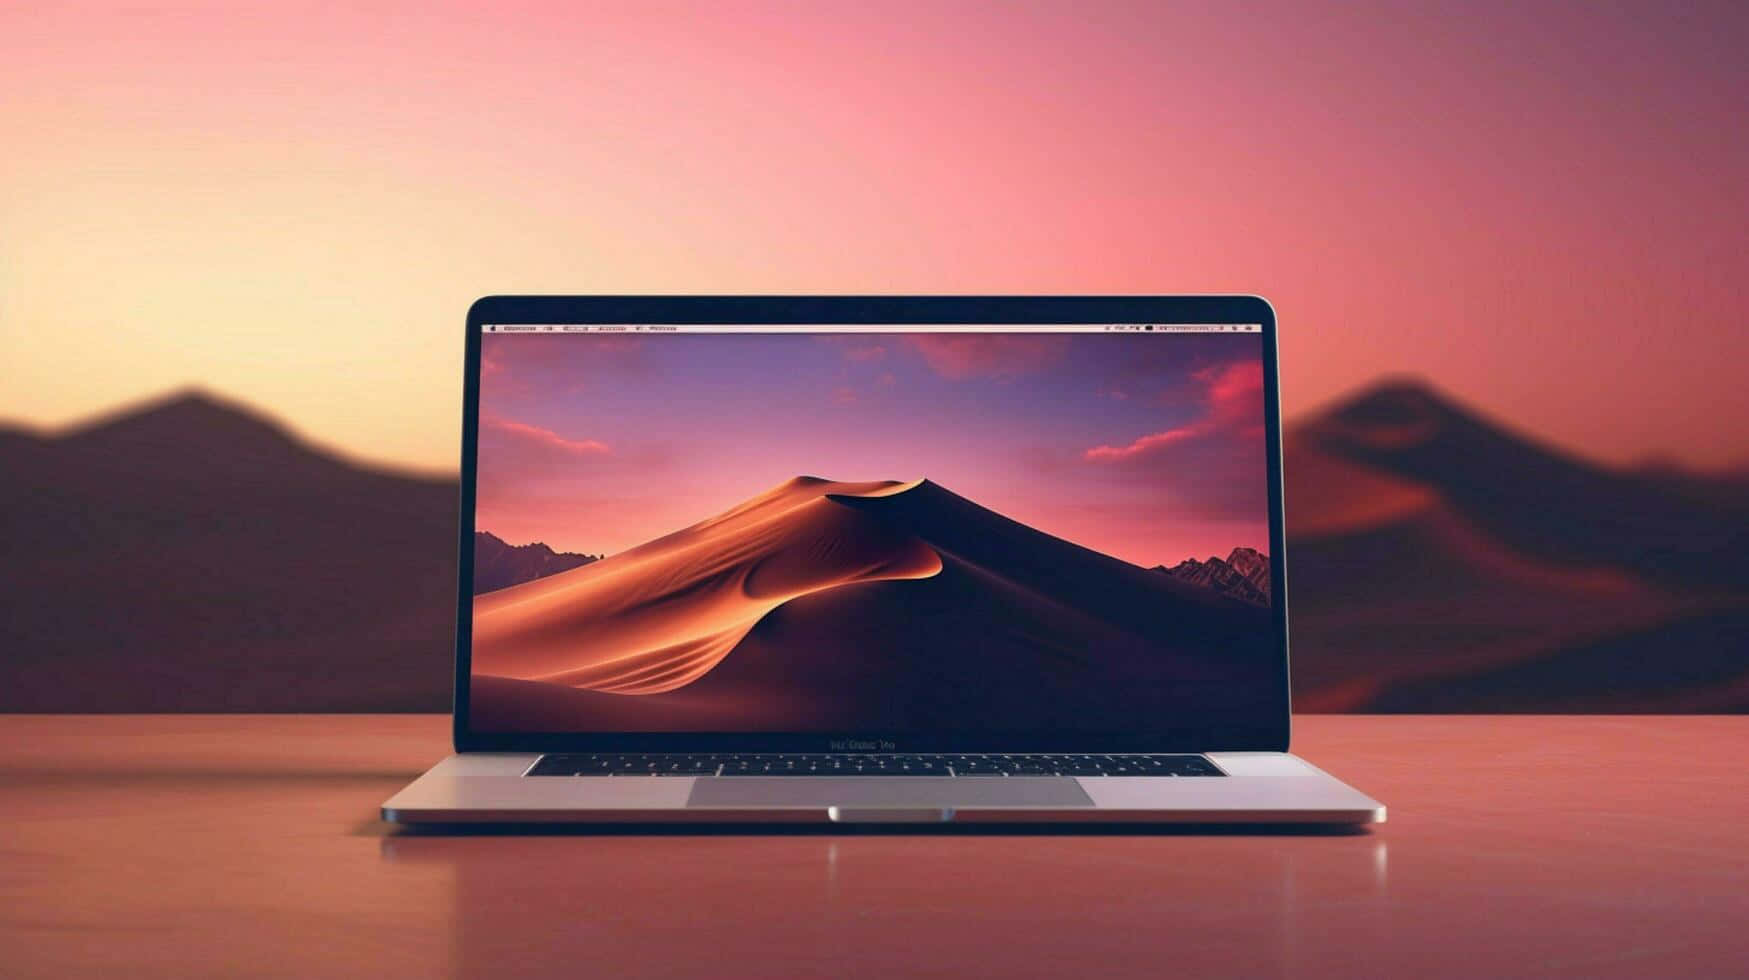 Macbook Air M2on Deskwith Sunset Backdrop Wallpaper